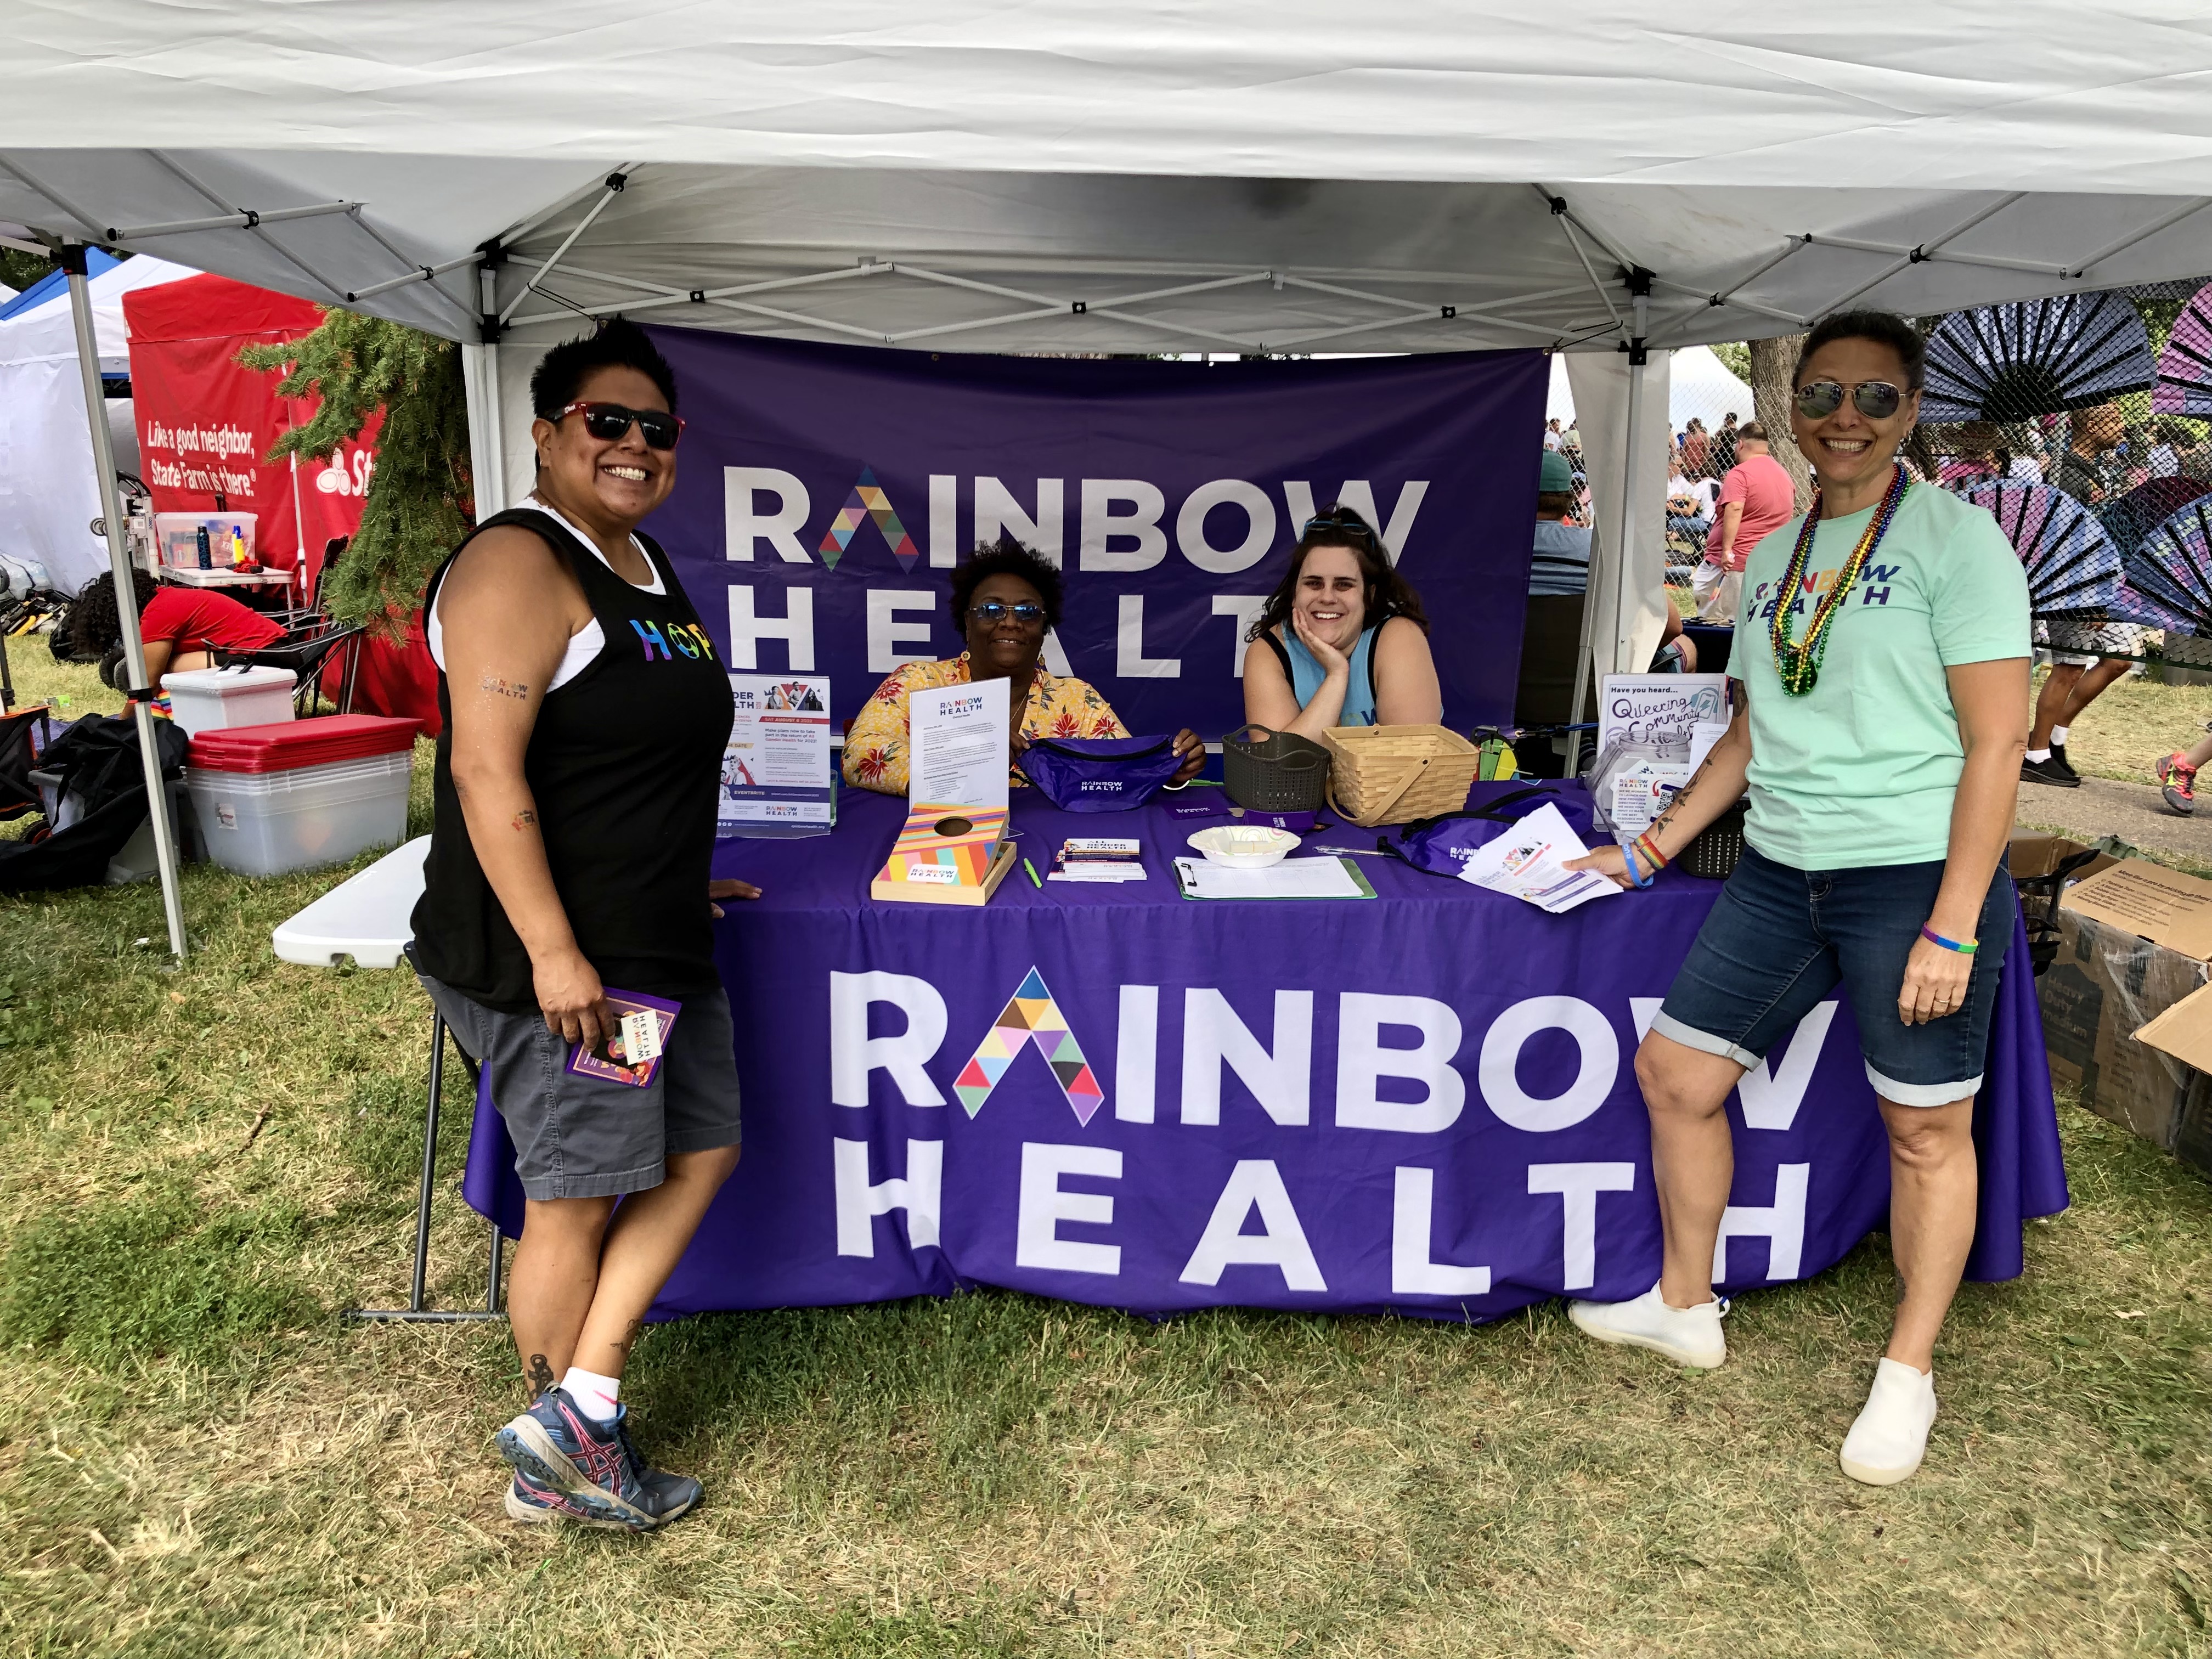 [Picture 2] Rainbow Health staff and volunteers in the booth at the 2022 Twin Cities Pride Festival. Over 500 people visited our booth where they were greeted with an opportunity to win raffle prizes, fun swag items, glitter and skin care kits donated by L’Oreal!